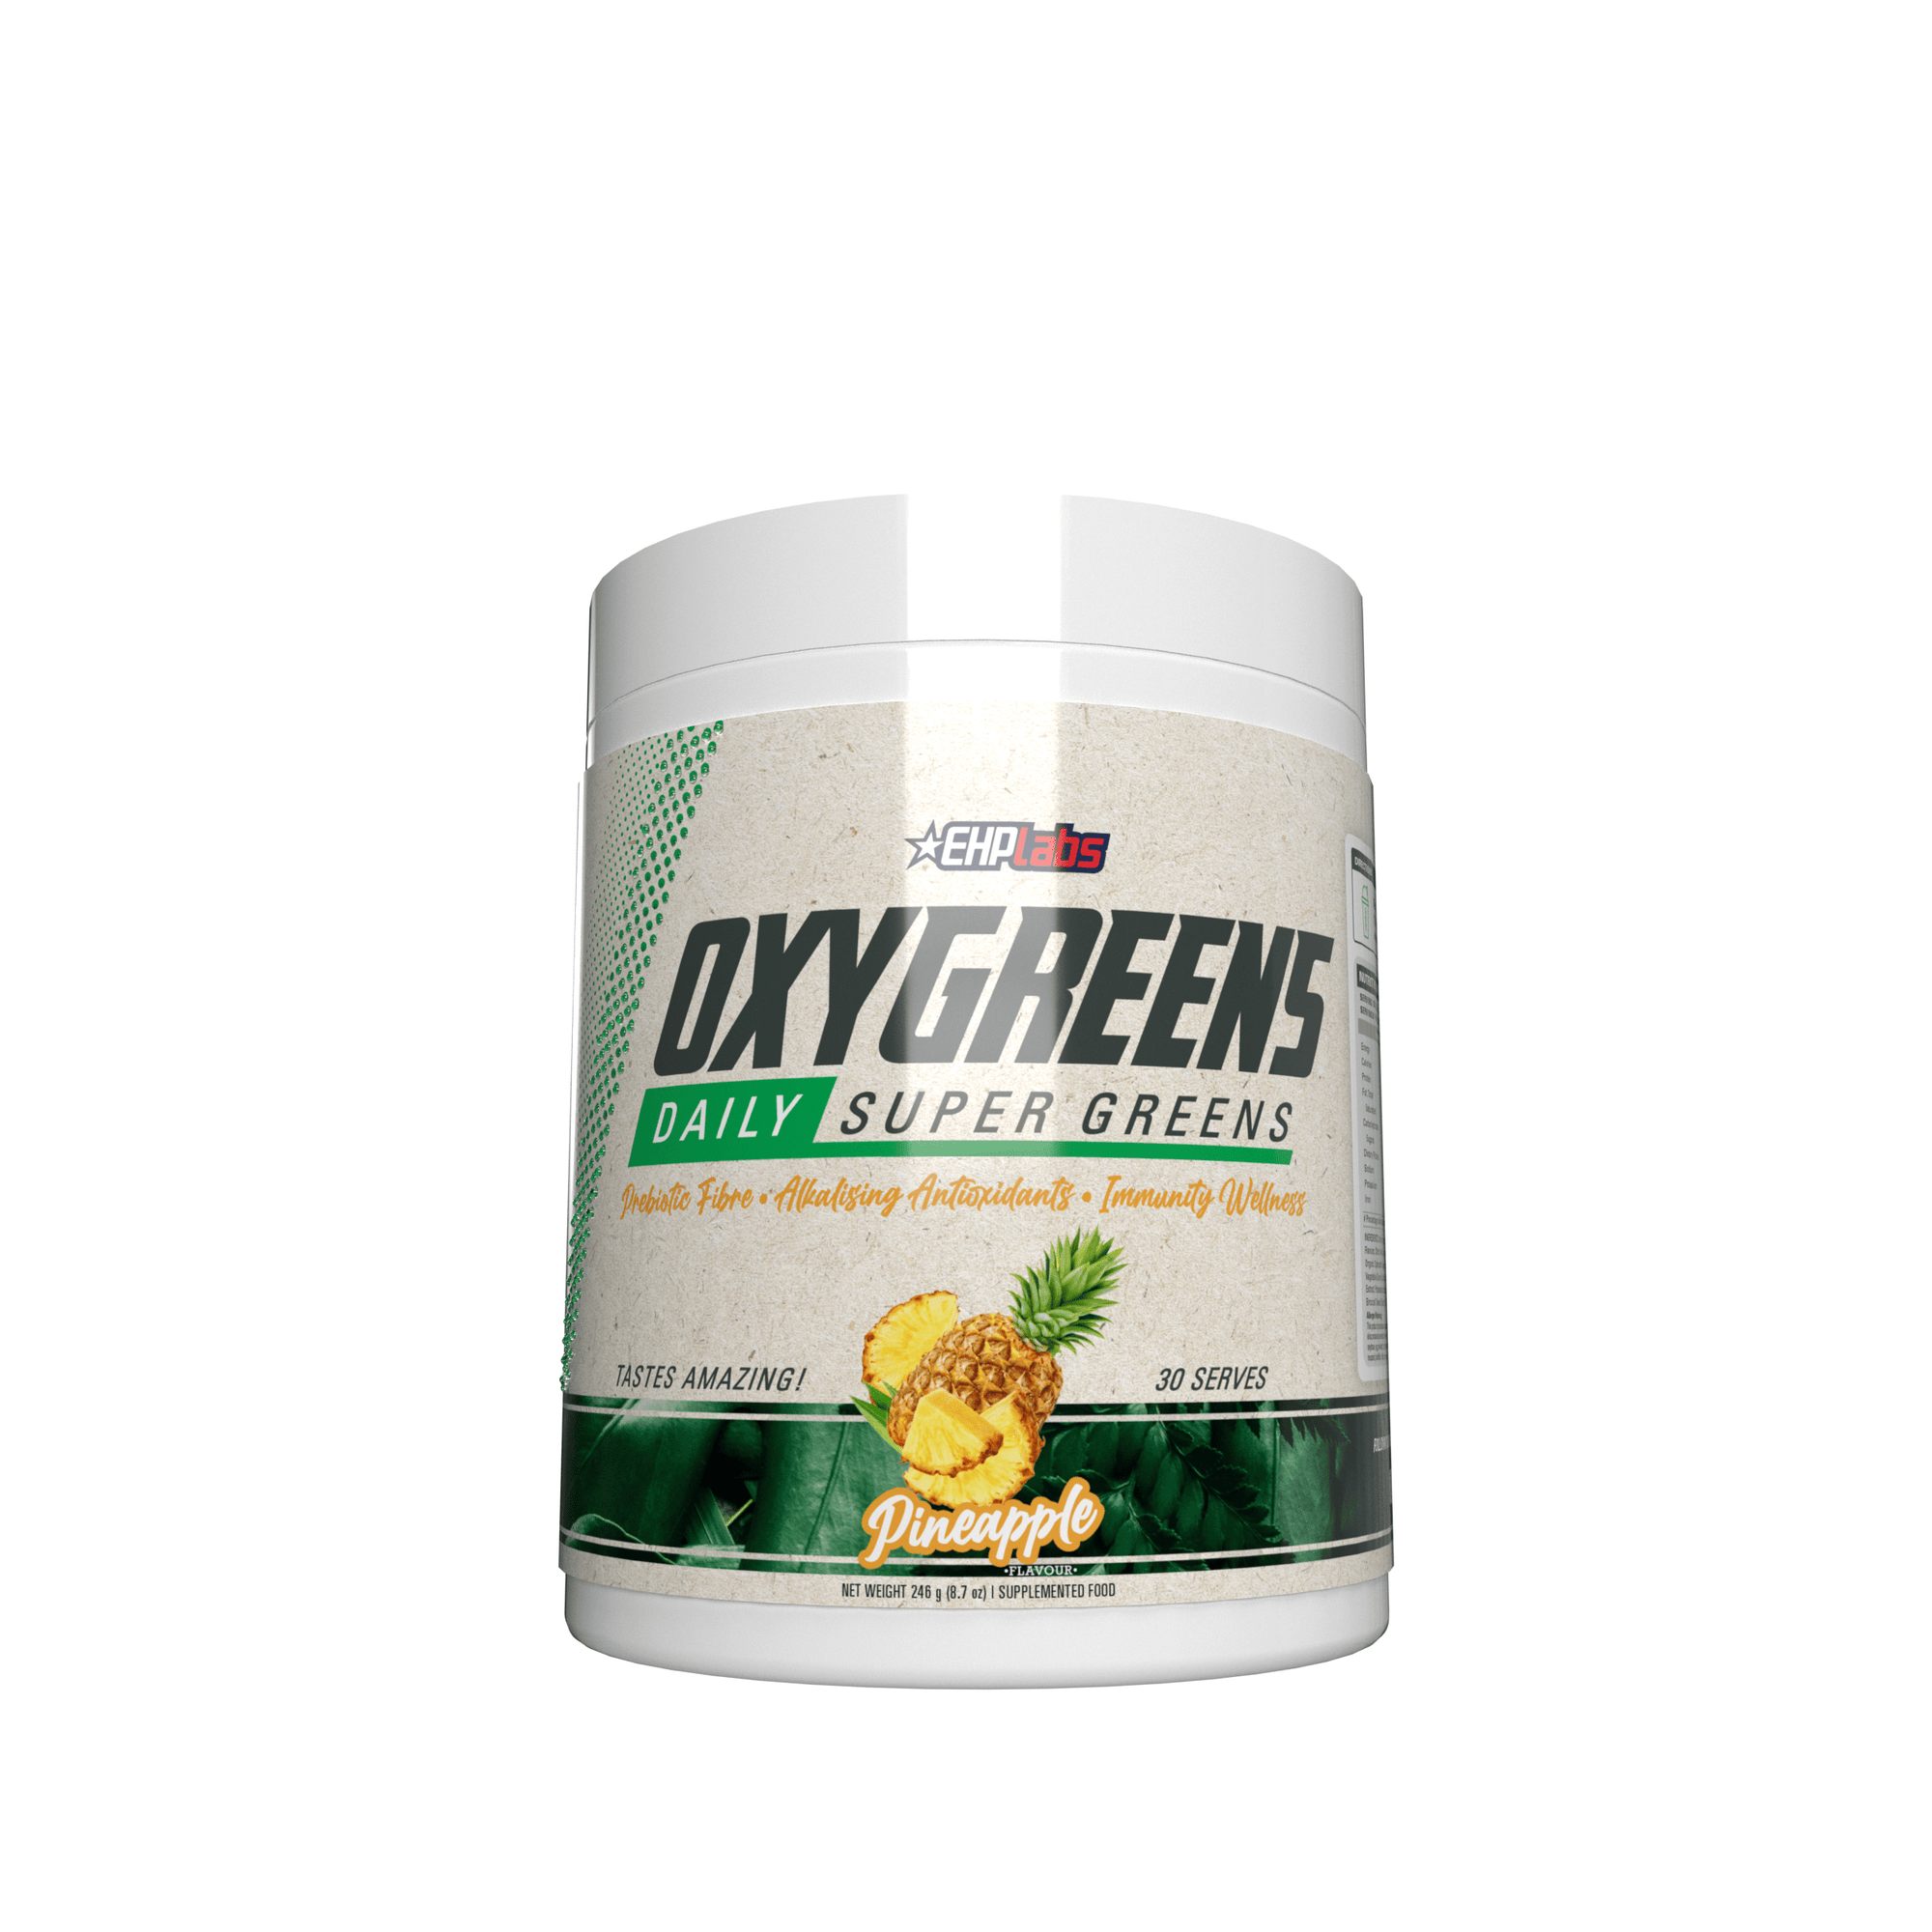 Fitness Hero presents OxyGreens by EHP Labs an all-encompassing superfood that tastes as good as it performs.  OxyGreens is a game-changing super greens powder that contains essential nutrients to enhance immunity, improve digestion and boost overall vitality and wellness. OxyGreens is the best greens powder on the market, suitable for everyone who wants to improve their health and wellbeing.